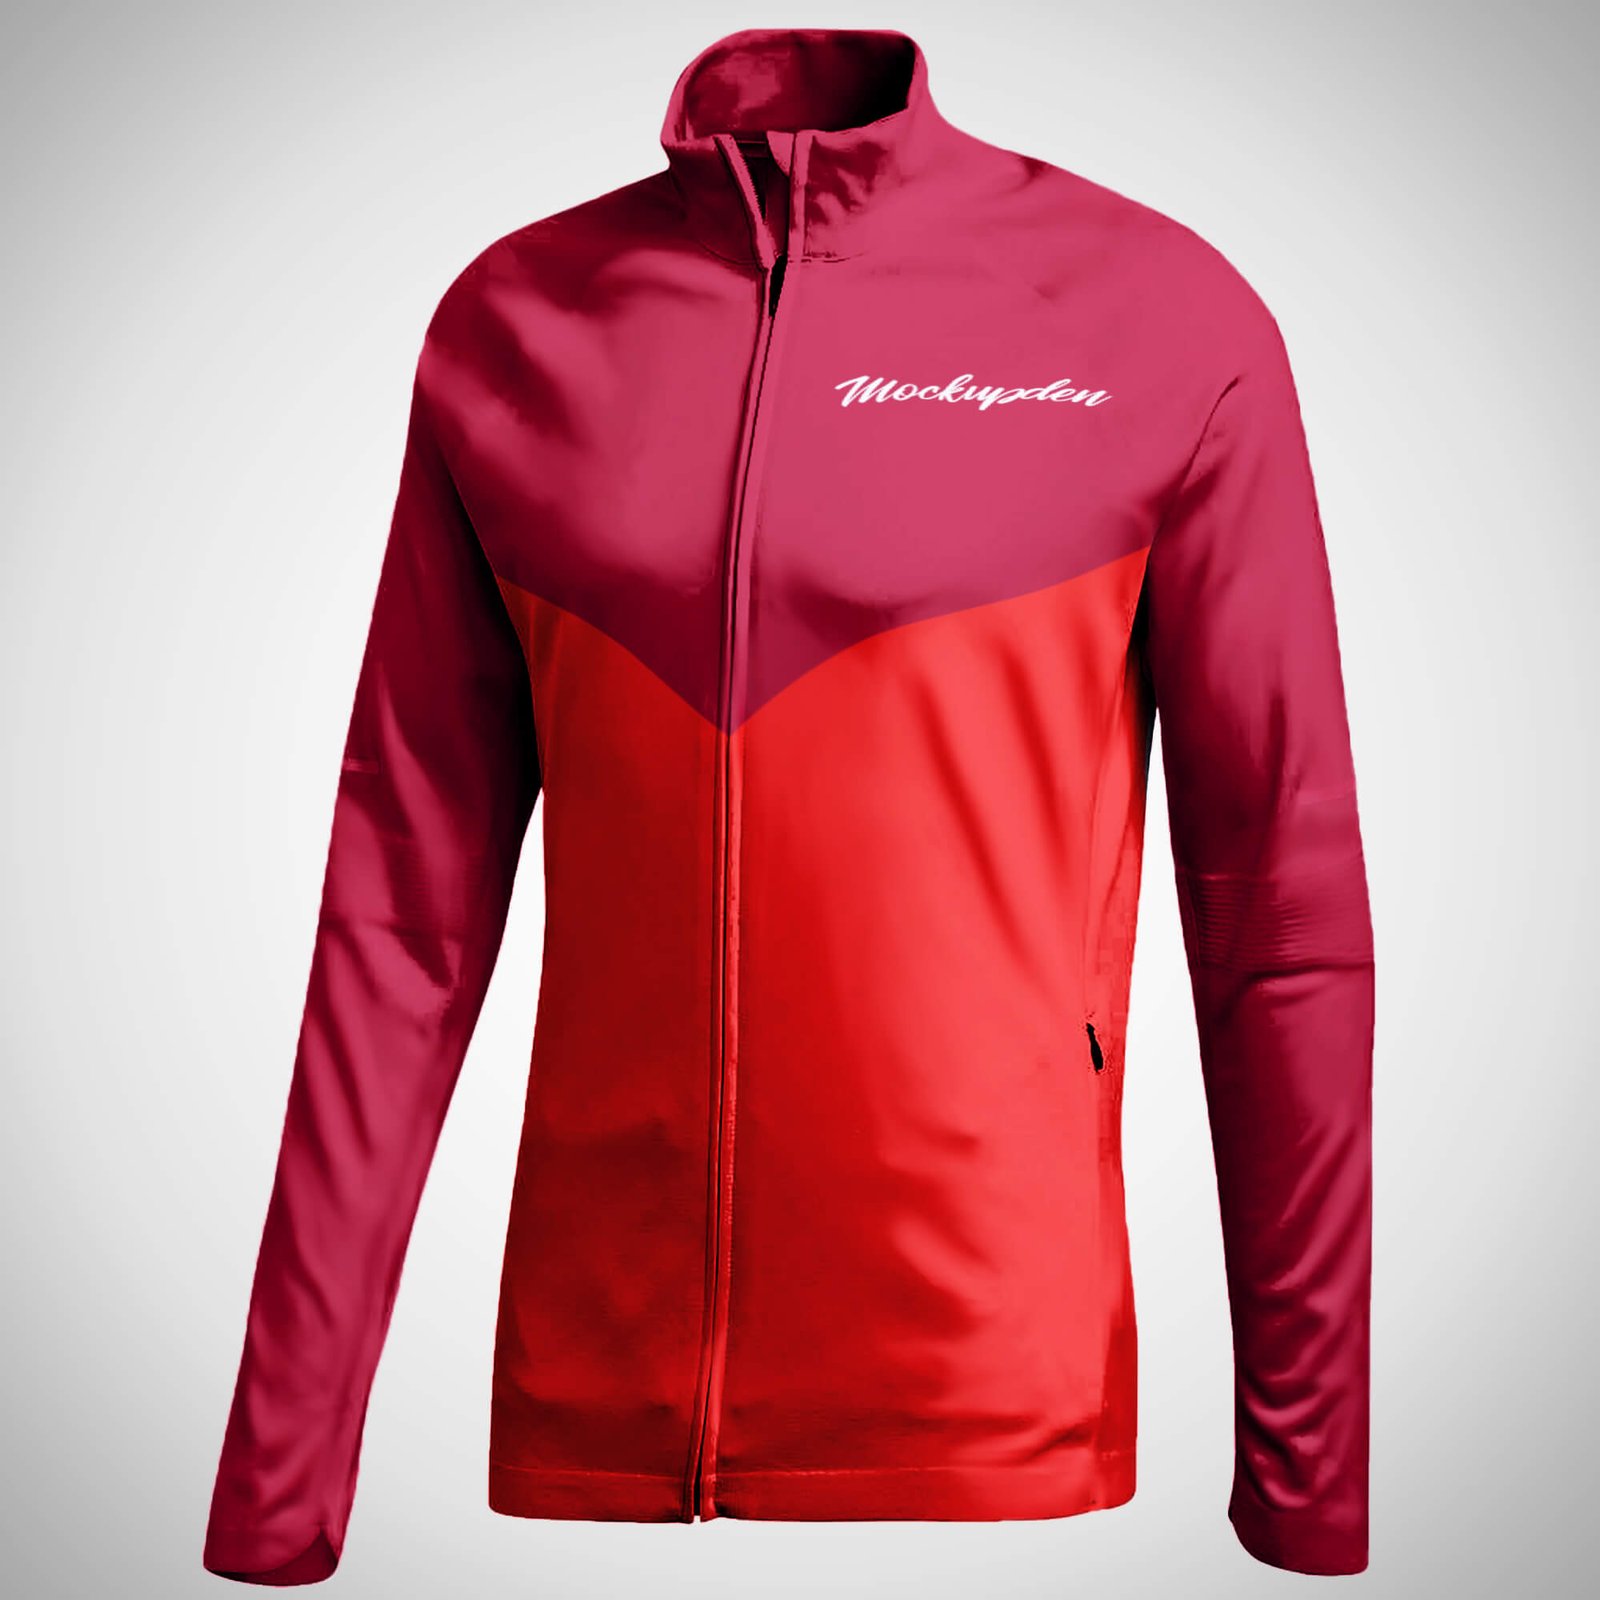 Download Free Track Jacket Mockup PSD Template:| Exclusive